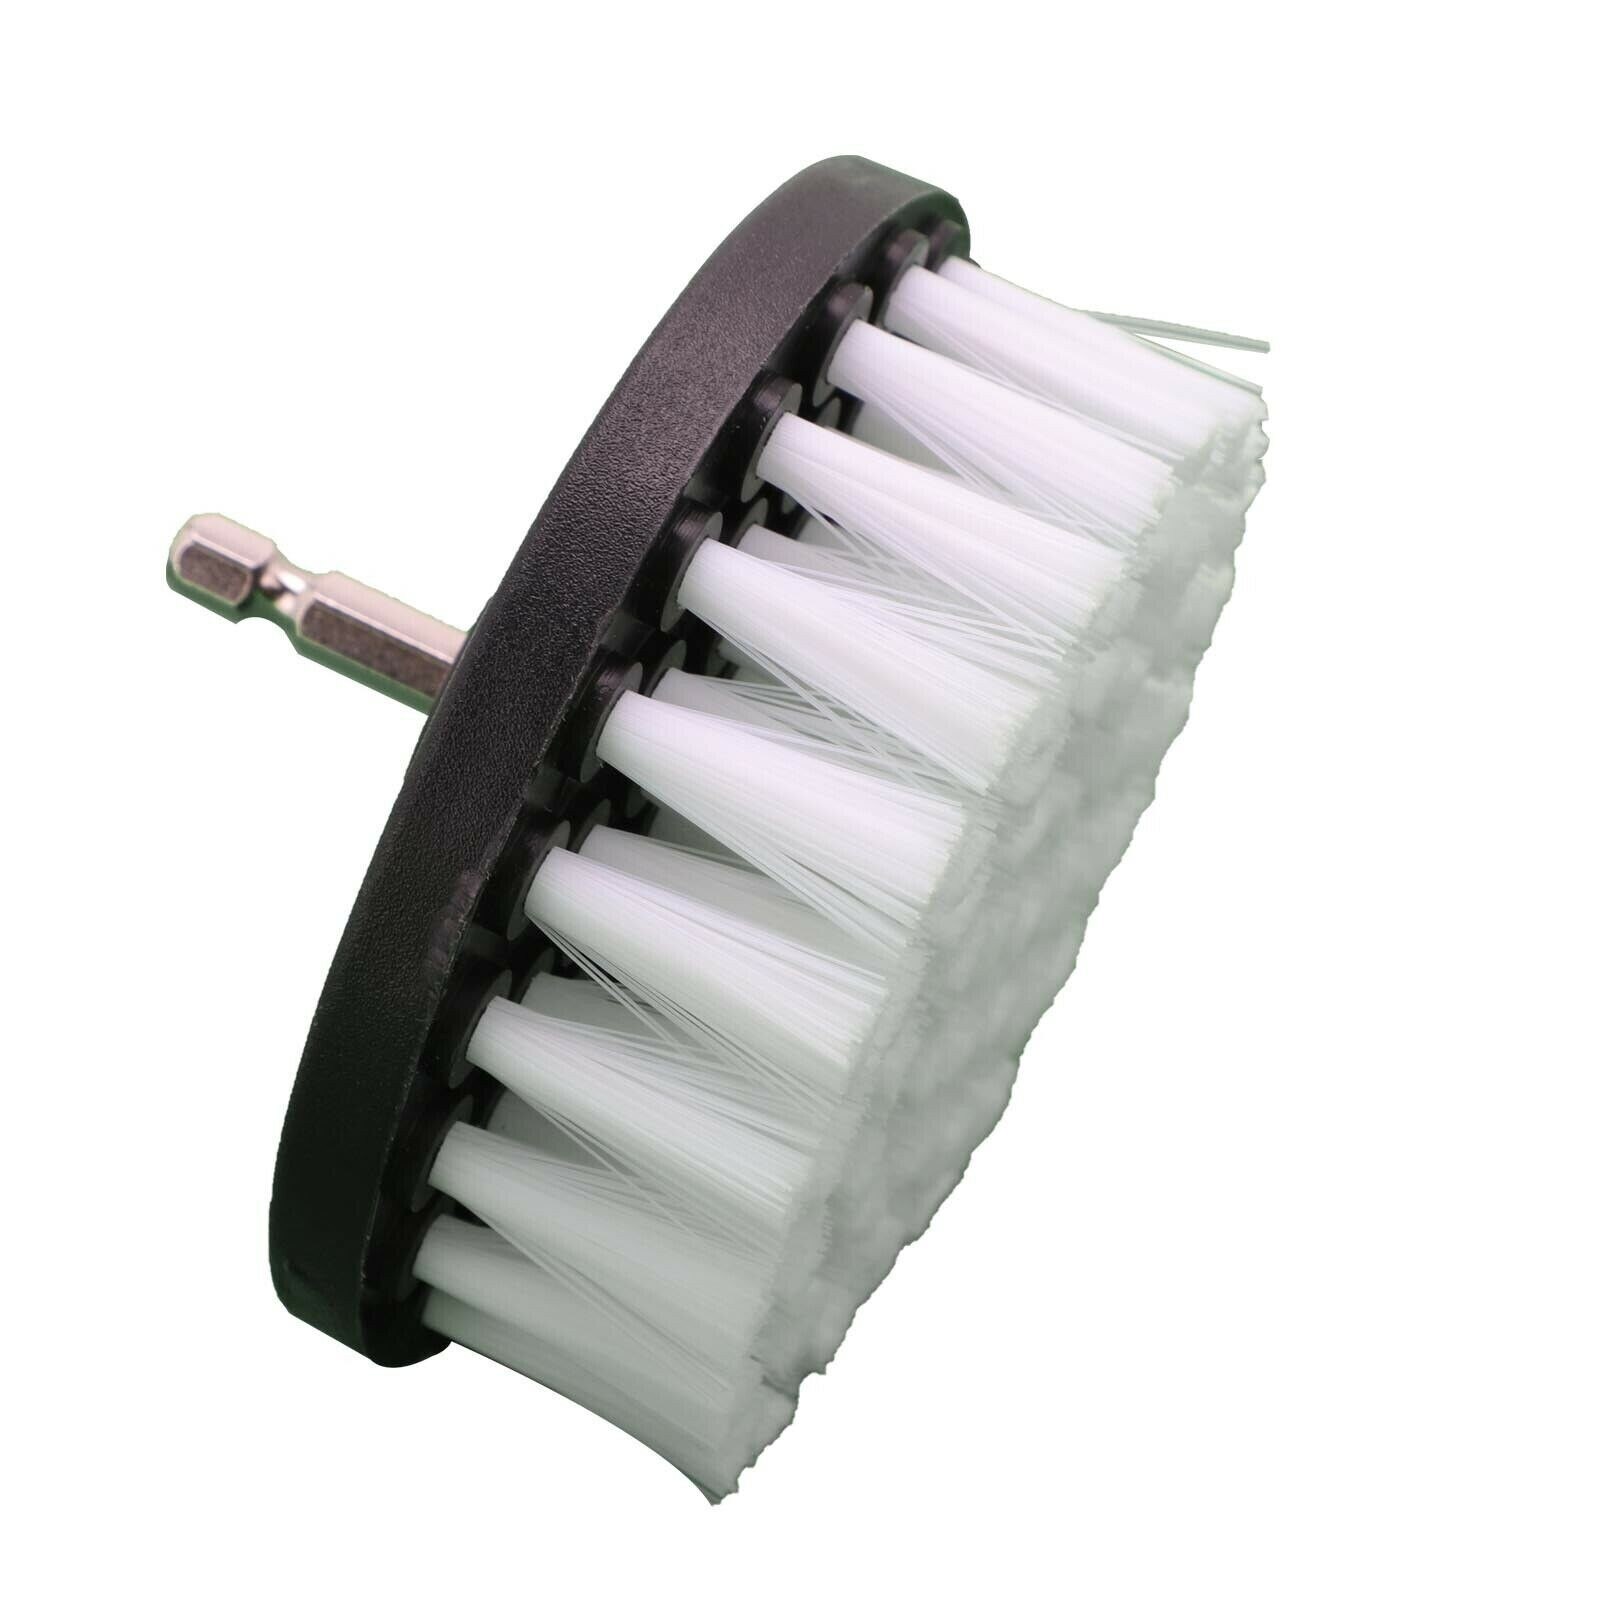 White Soft Brush Attachment For Cleaning Carpet Leather Carpet Glass Car Tires Electric Round Cleaning Brush